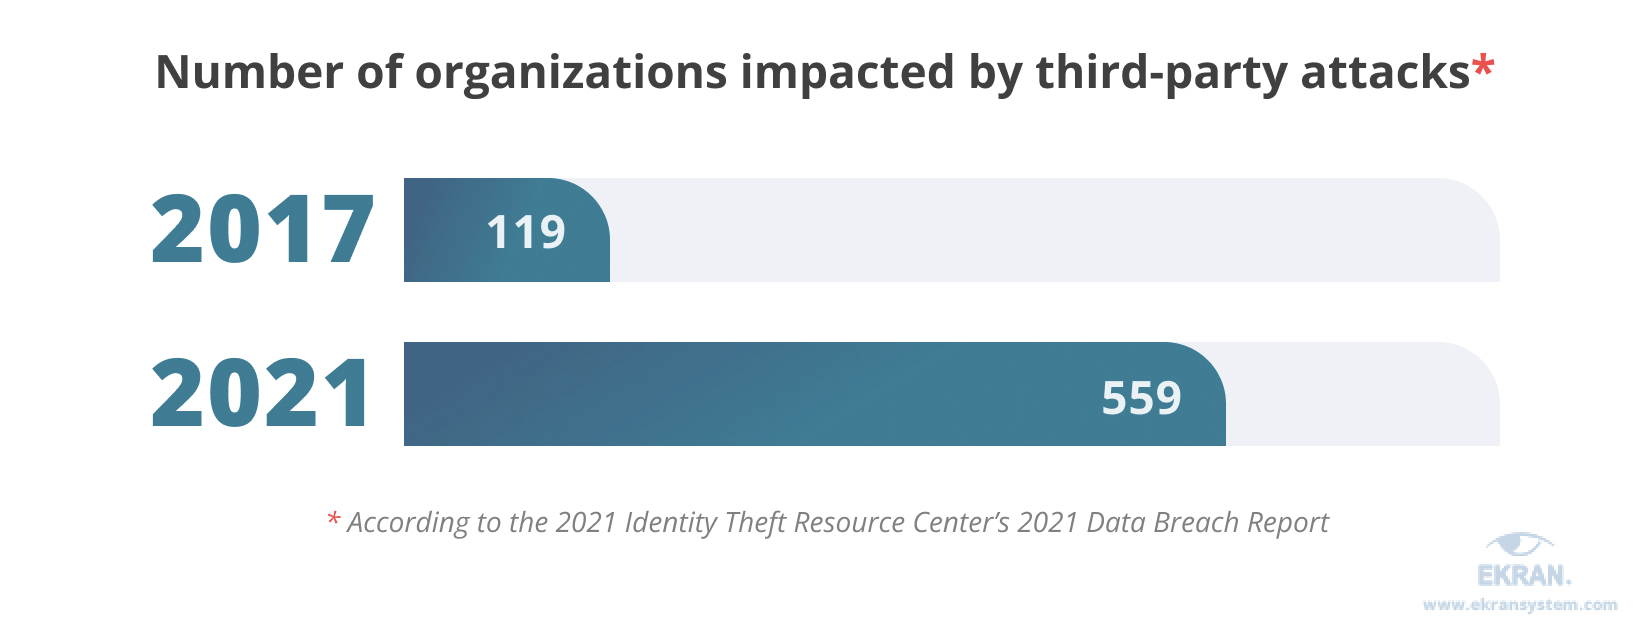 Number of organizations impacted by third-party attacks 2021